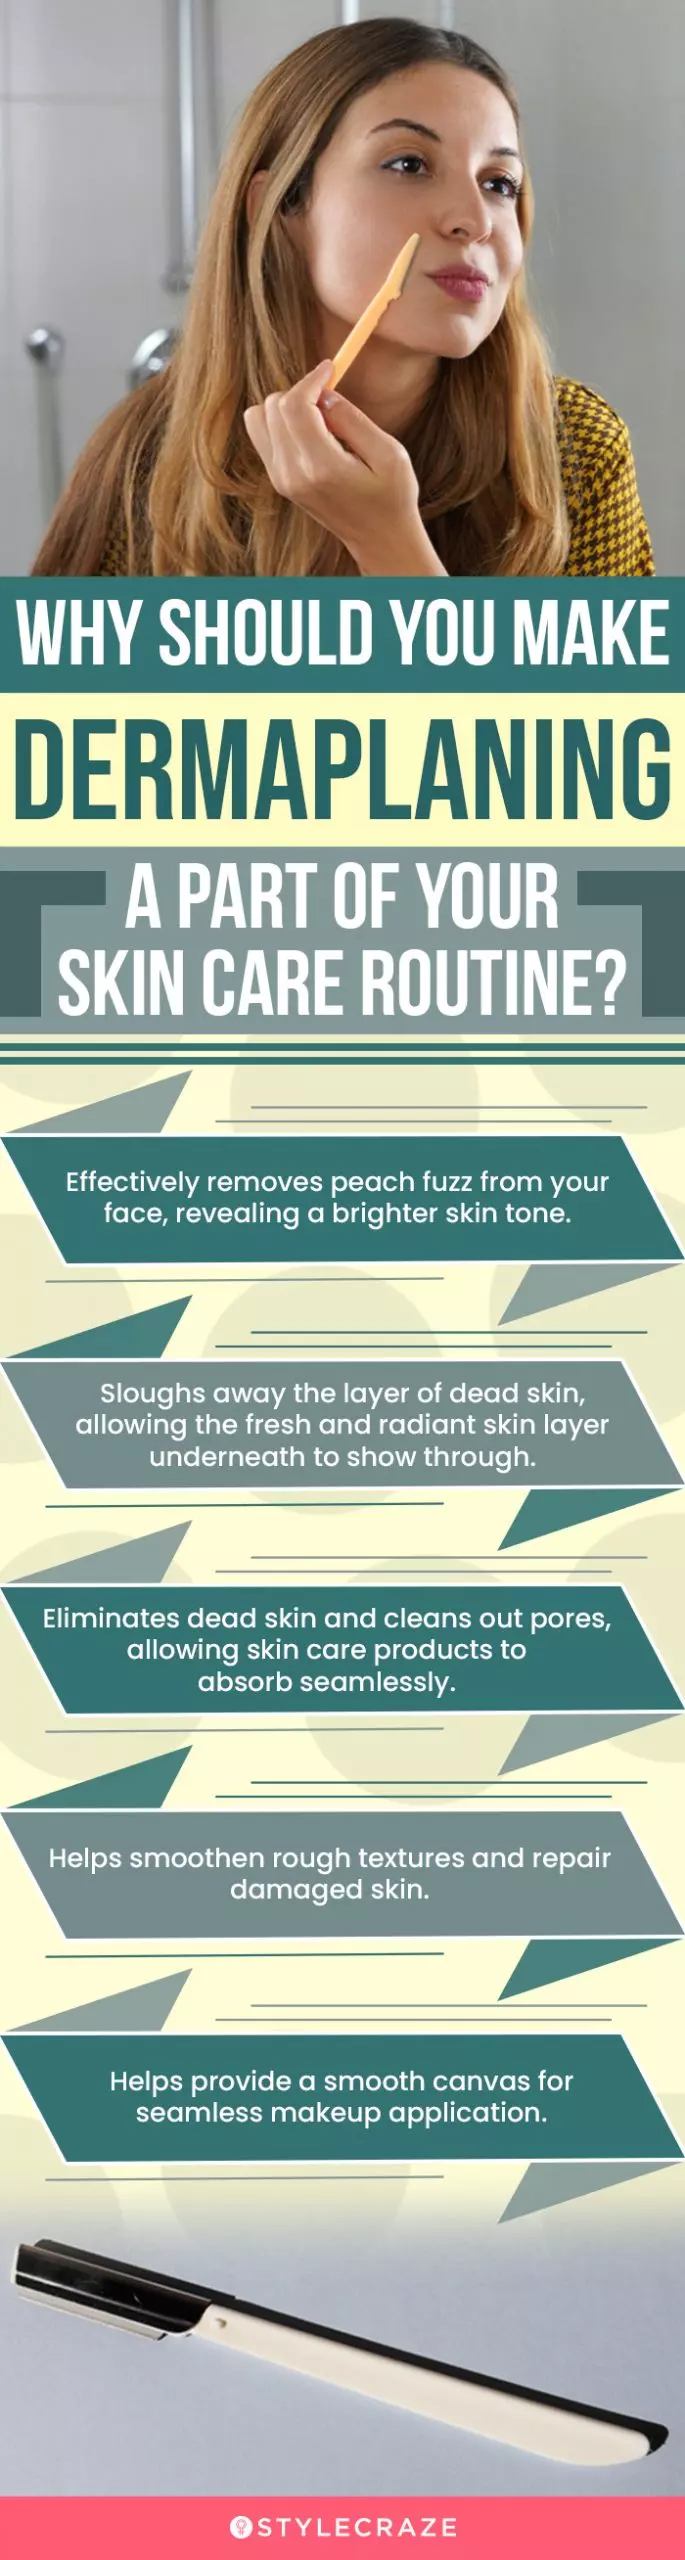 Why Should You Make Dermaplaning A Part Of Your Skin Care Routine? (infographic)